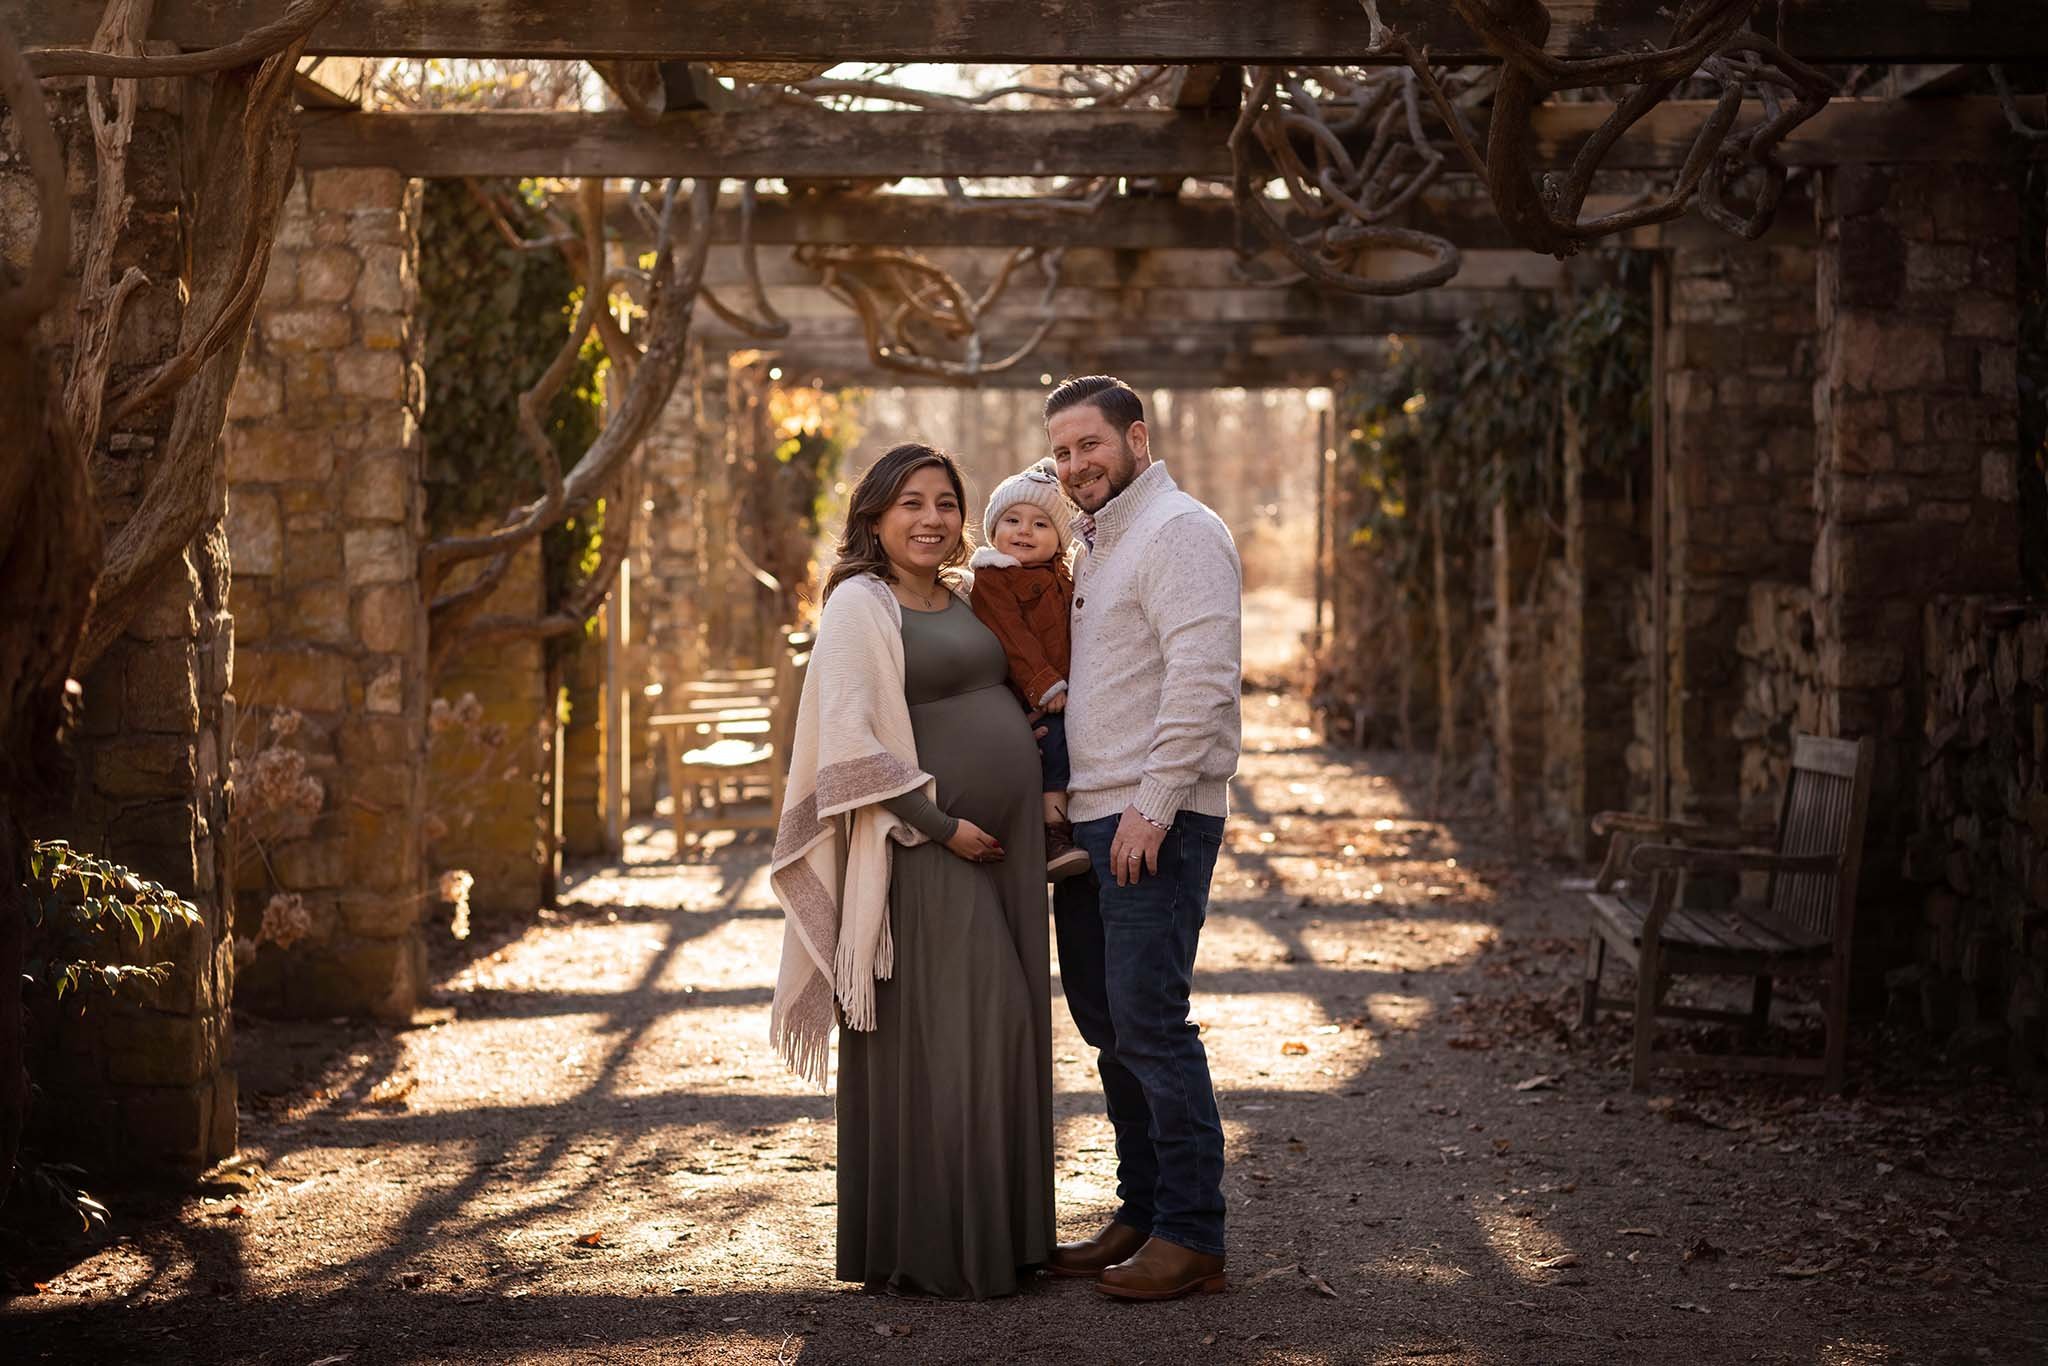 maternity photography family smiling together